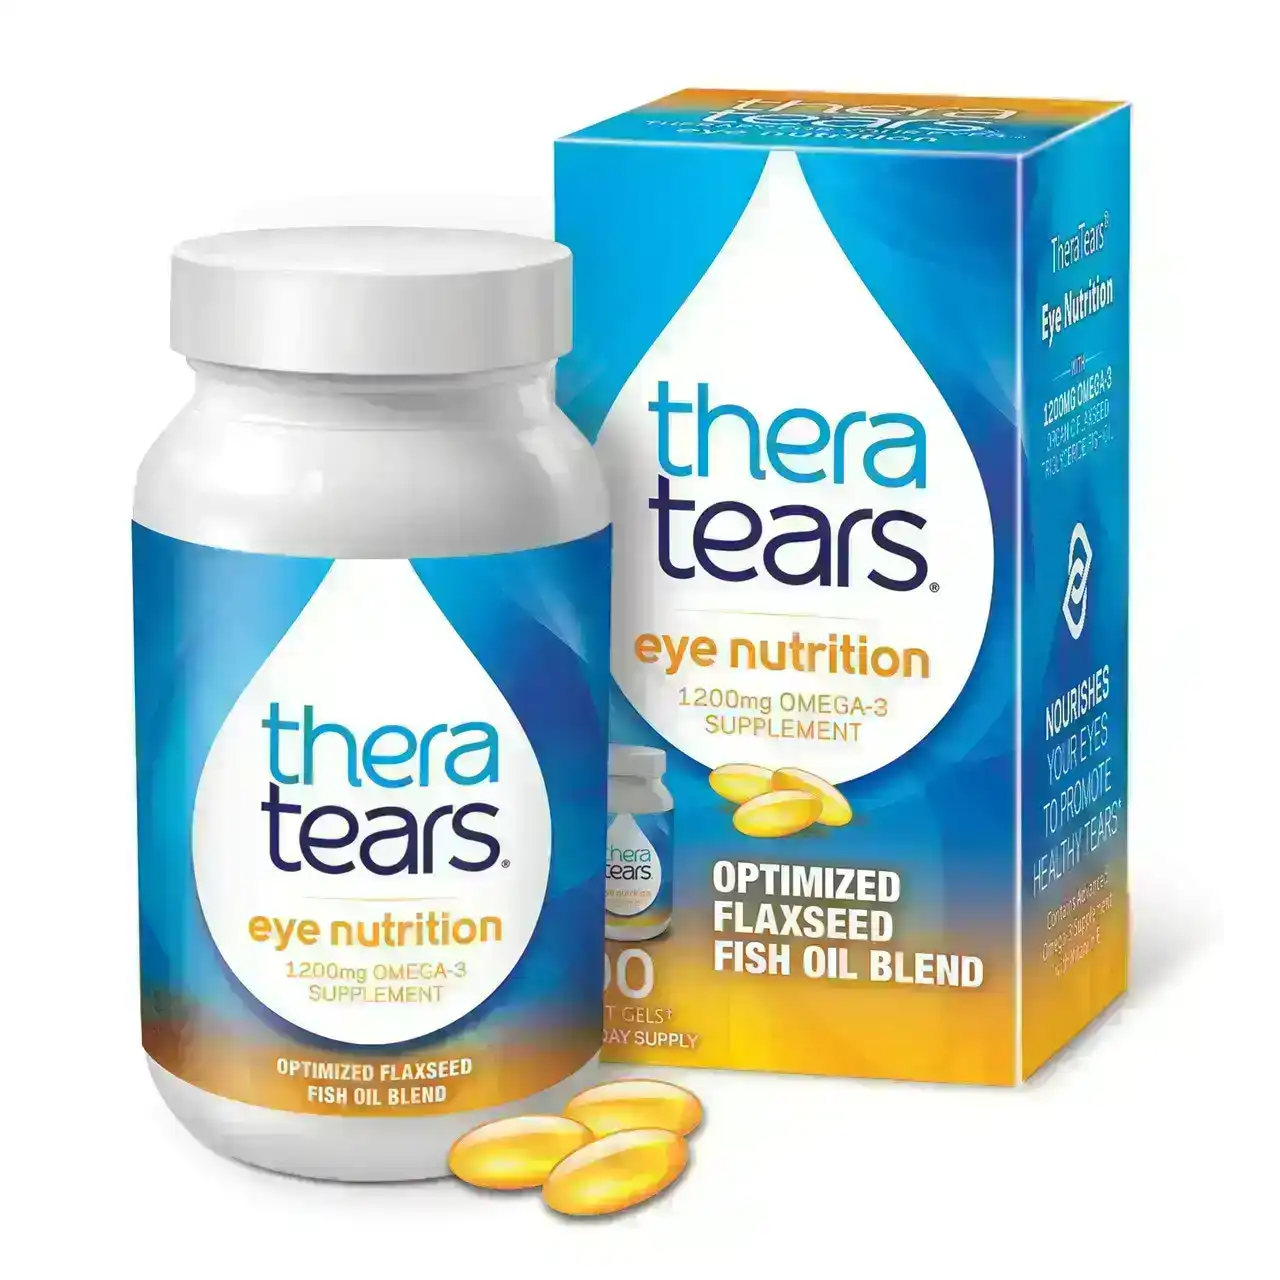 Thera Tears Eye Nutrition 1200mg Omega-3 Supplement 90 Soft Gels